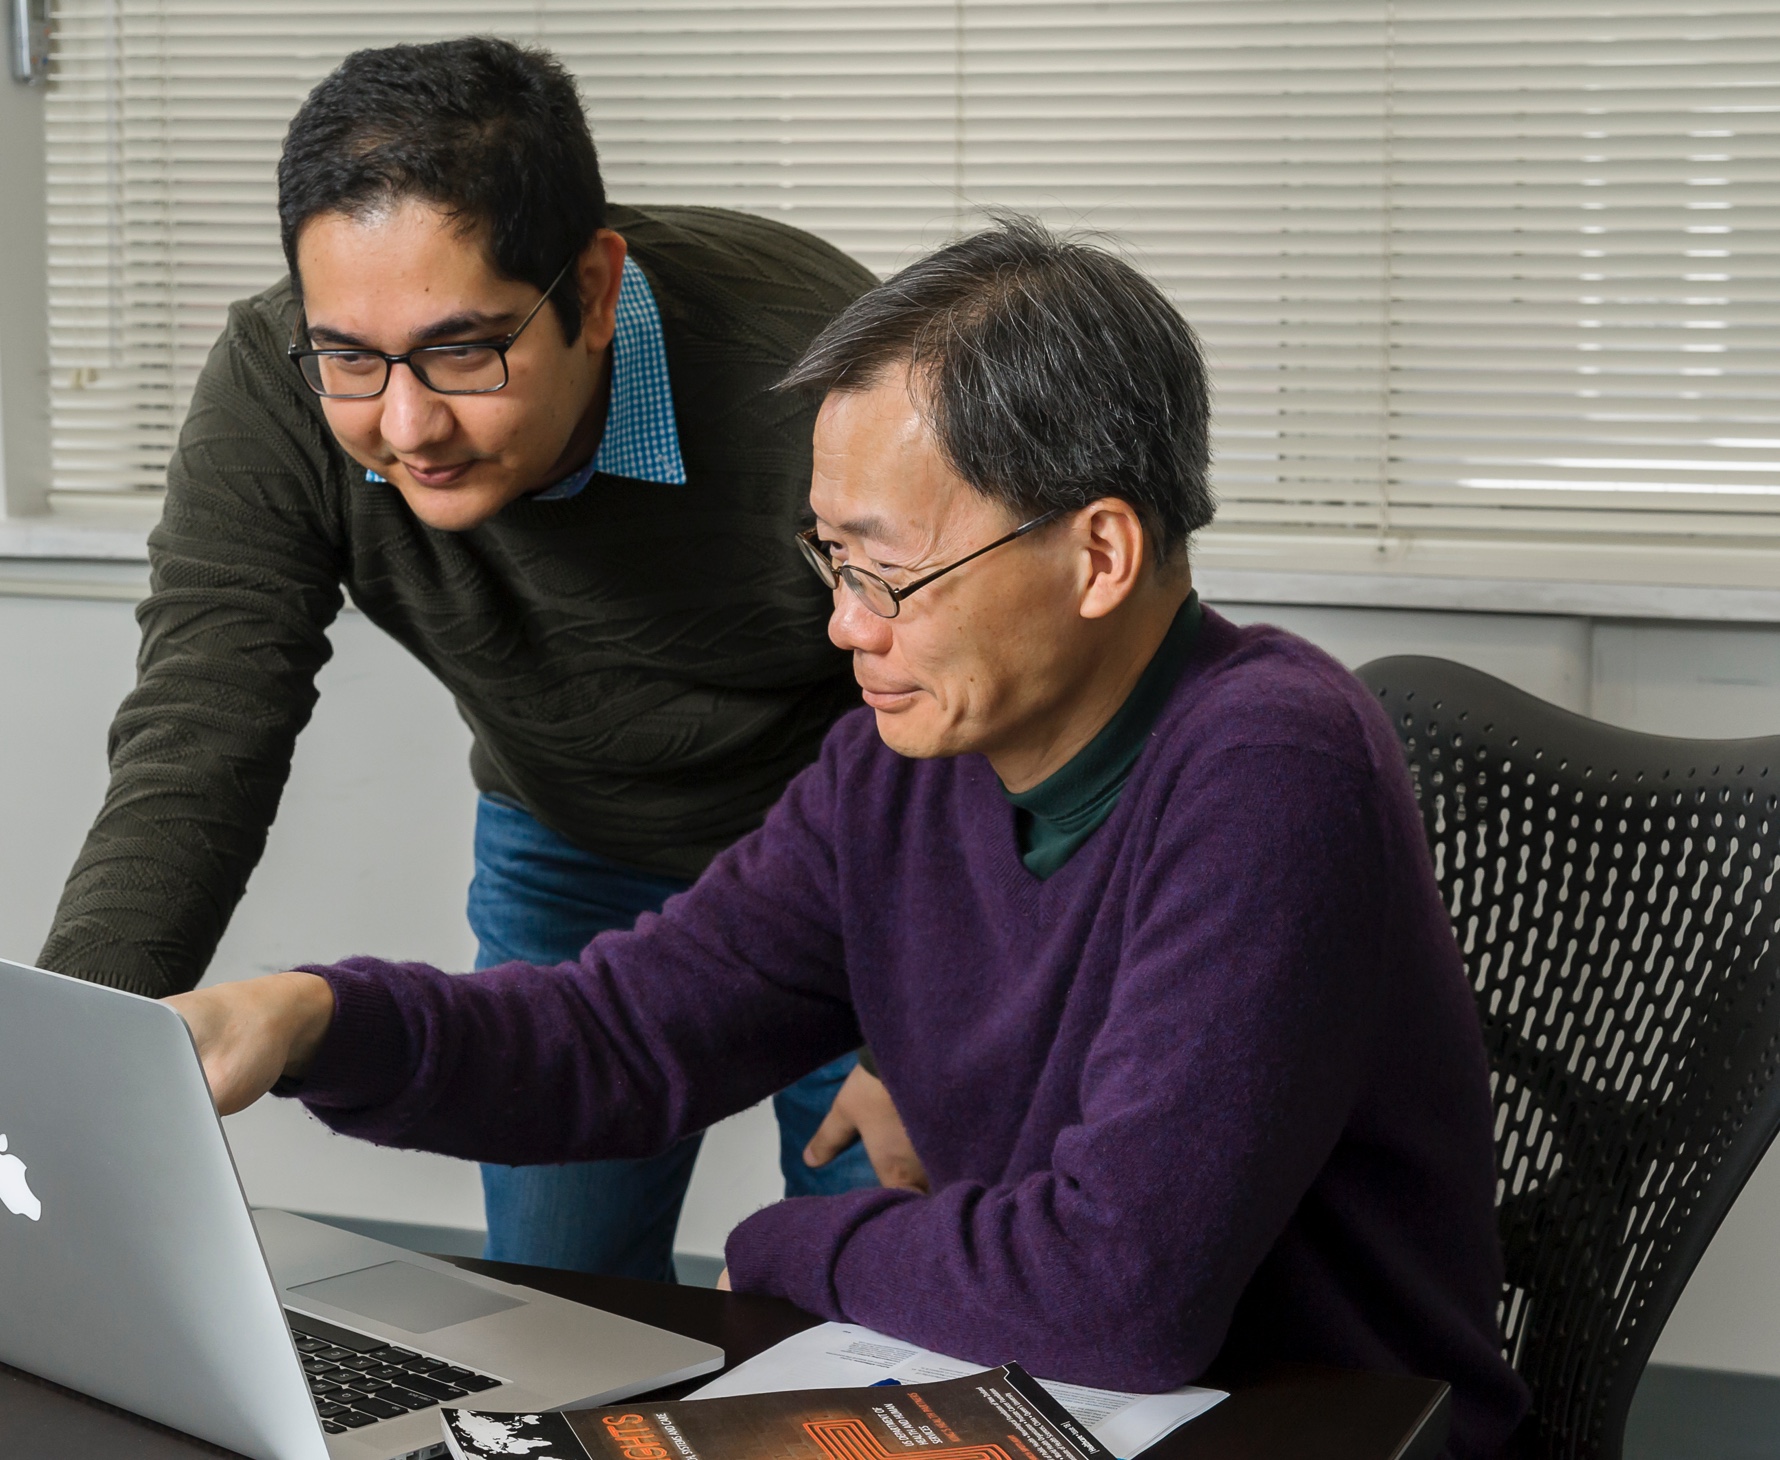 Scientists Drs. Hubert Wong and Ehsan Karim analyze data on computer, medical device clinical studies